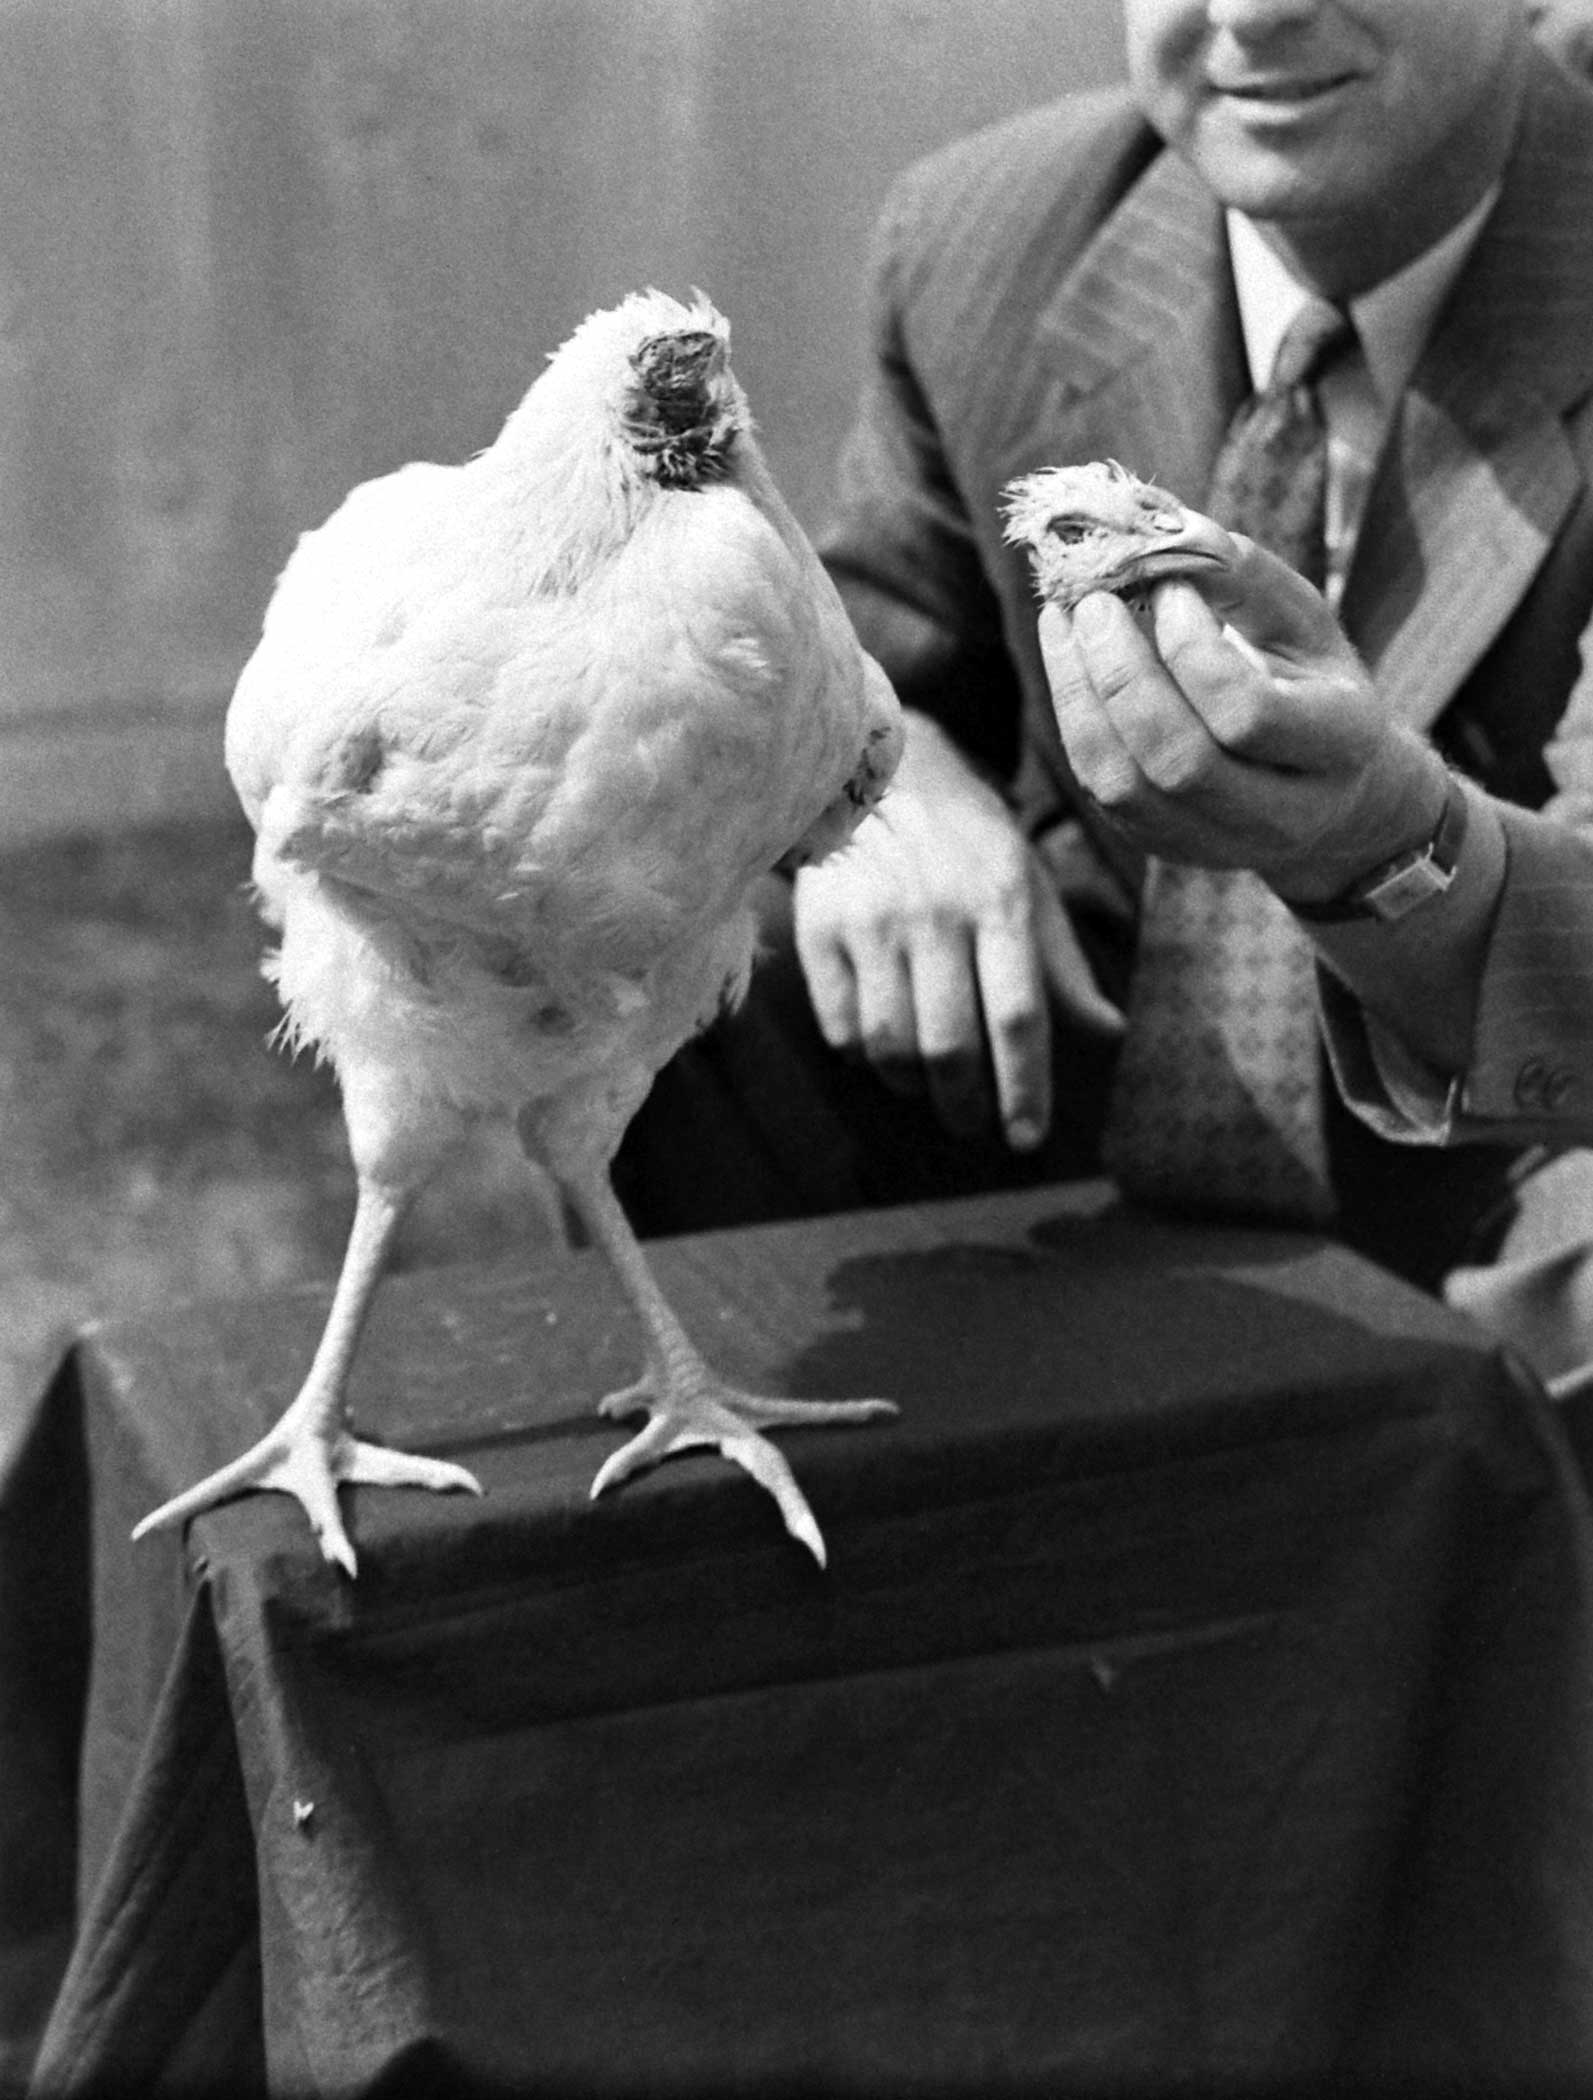 Promoter Hope Wade holds Mike the headless chicken's formerly useful noggin, as if attempting to reintroduce the bird to its lost self, in 1945. (Some reports, however, claim that the Olsons' cat ate Mike's head, and that another rooster's head stood in for Mike's during his brief brush with fame.)